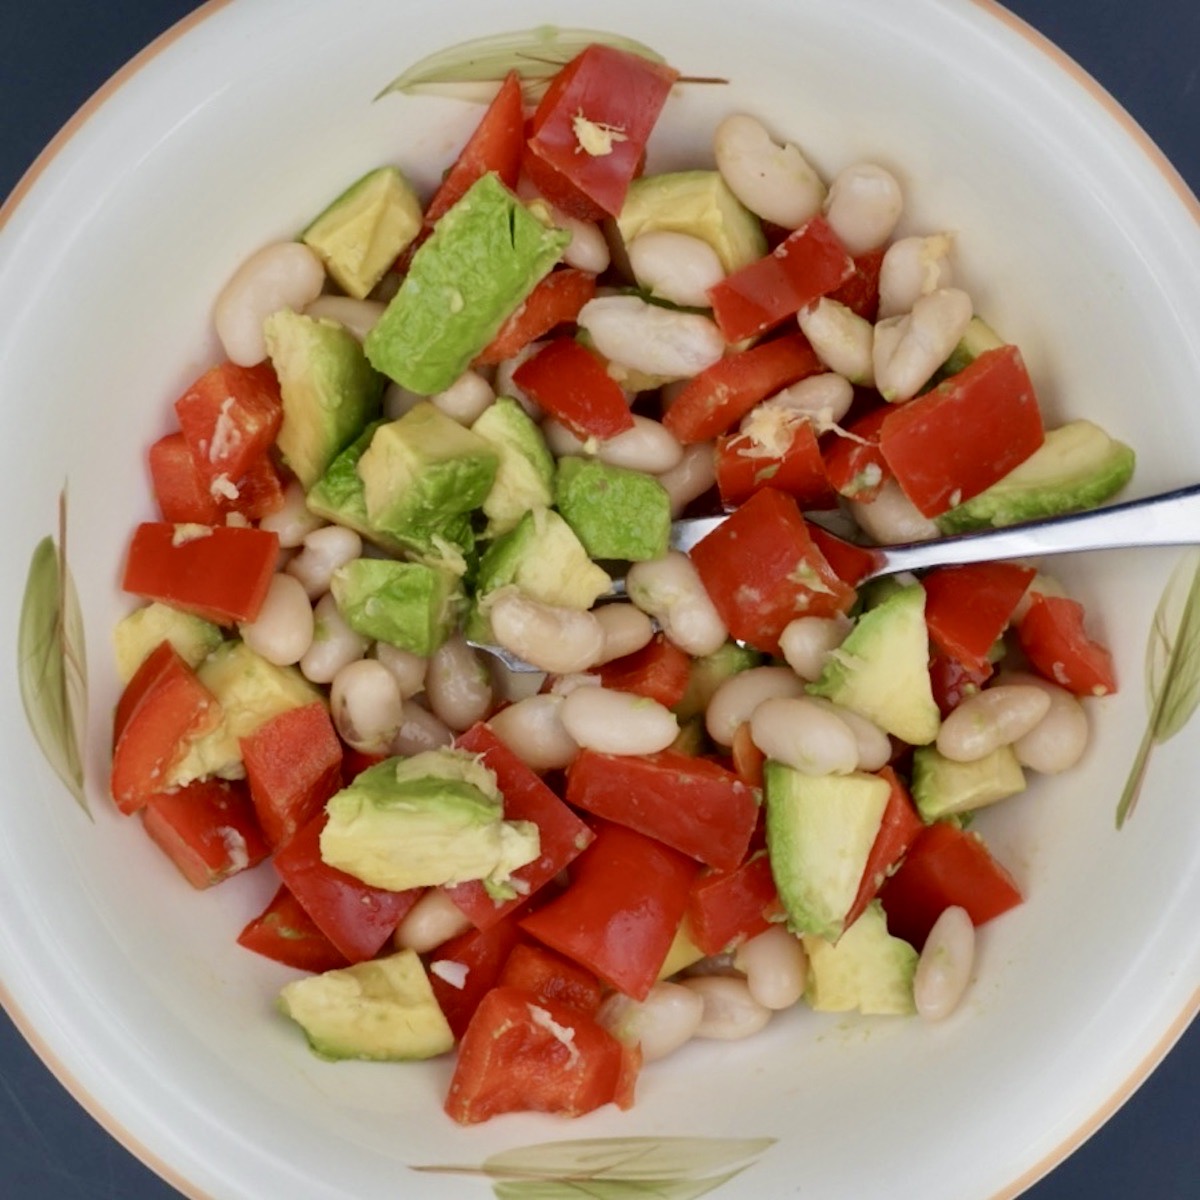 Overhead view of a bowl of avocado and red pepper salad with beans